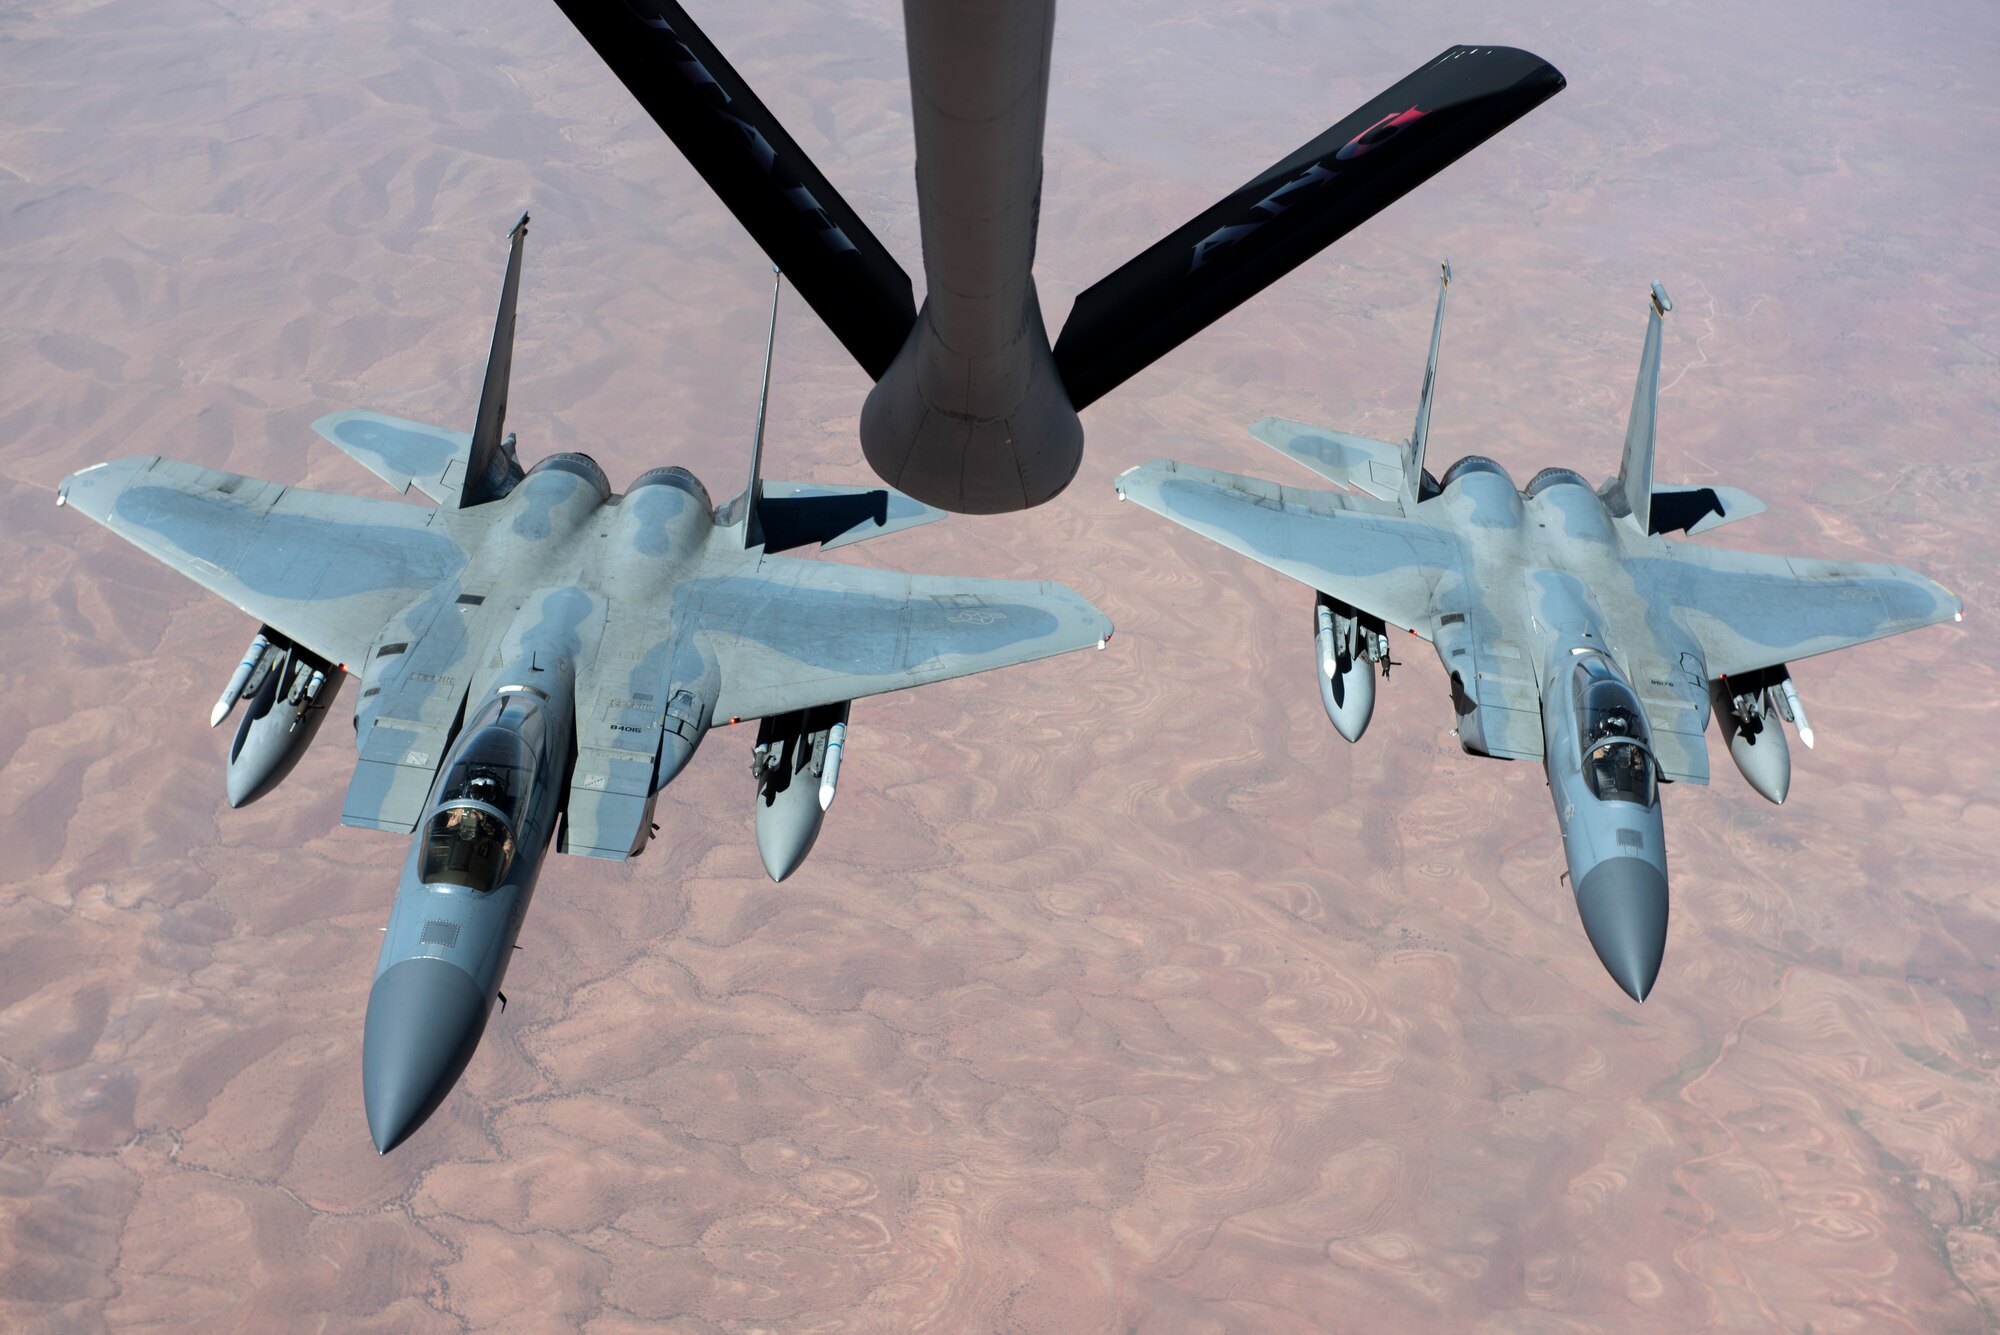 Two F-15C Eagles assigned to the 493rd Fighter Squadron prepare to receive fuel from a KC-135 Stratotanker from the 191st Air Refueling Squadron, during Exercise African Lion April 20, 2018. Various units from the U.S. Armed Forces will conduct multilateral and stability operations training with units from the Royal Moroccan Armed Forces in the Kingdom of Morocco. This combined multilateral exercise is designed to improve interoperability and mutual understanding of each nation’s tactics, techniques and procedures while demonstrating the strong bond between the nation’s militaries. (U.S. Air Force photo/Senior Airman Malcolm Mayfield)